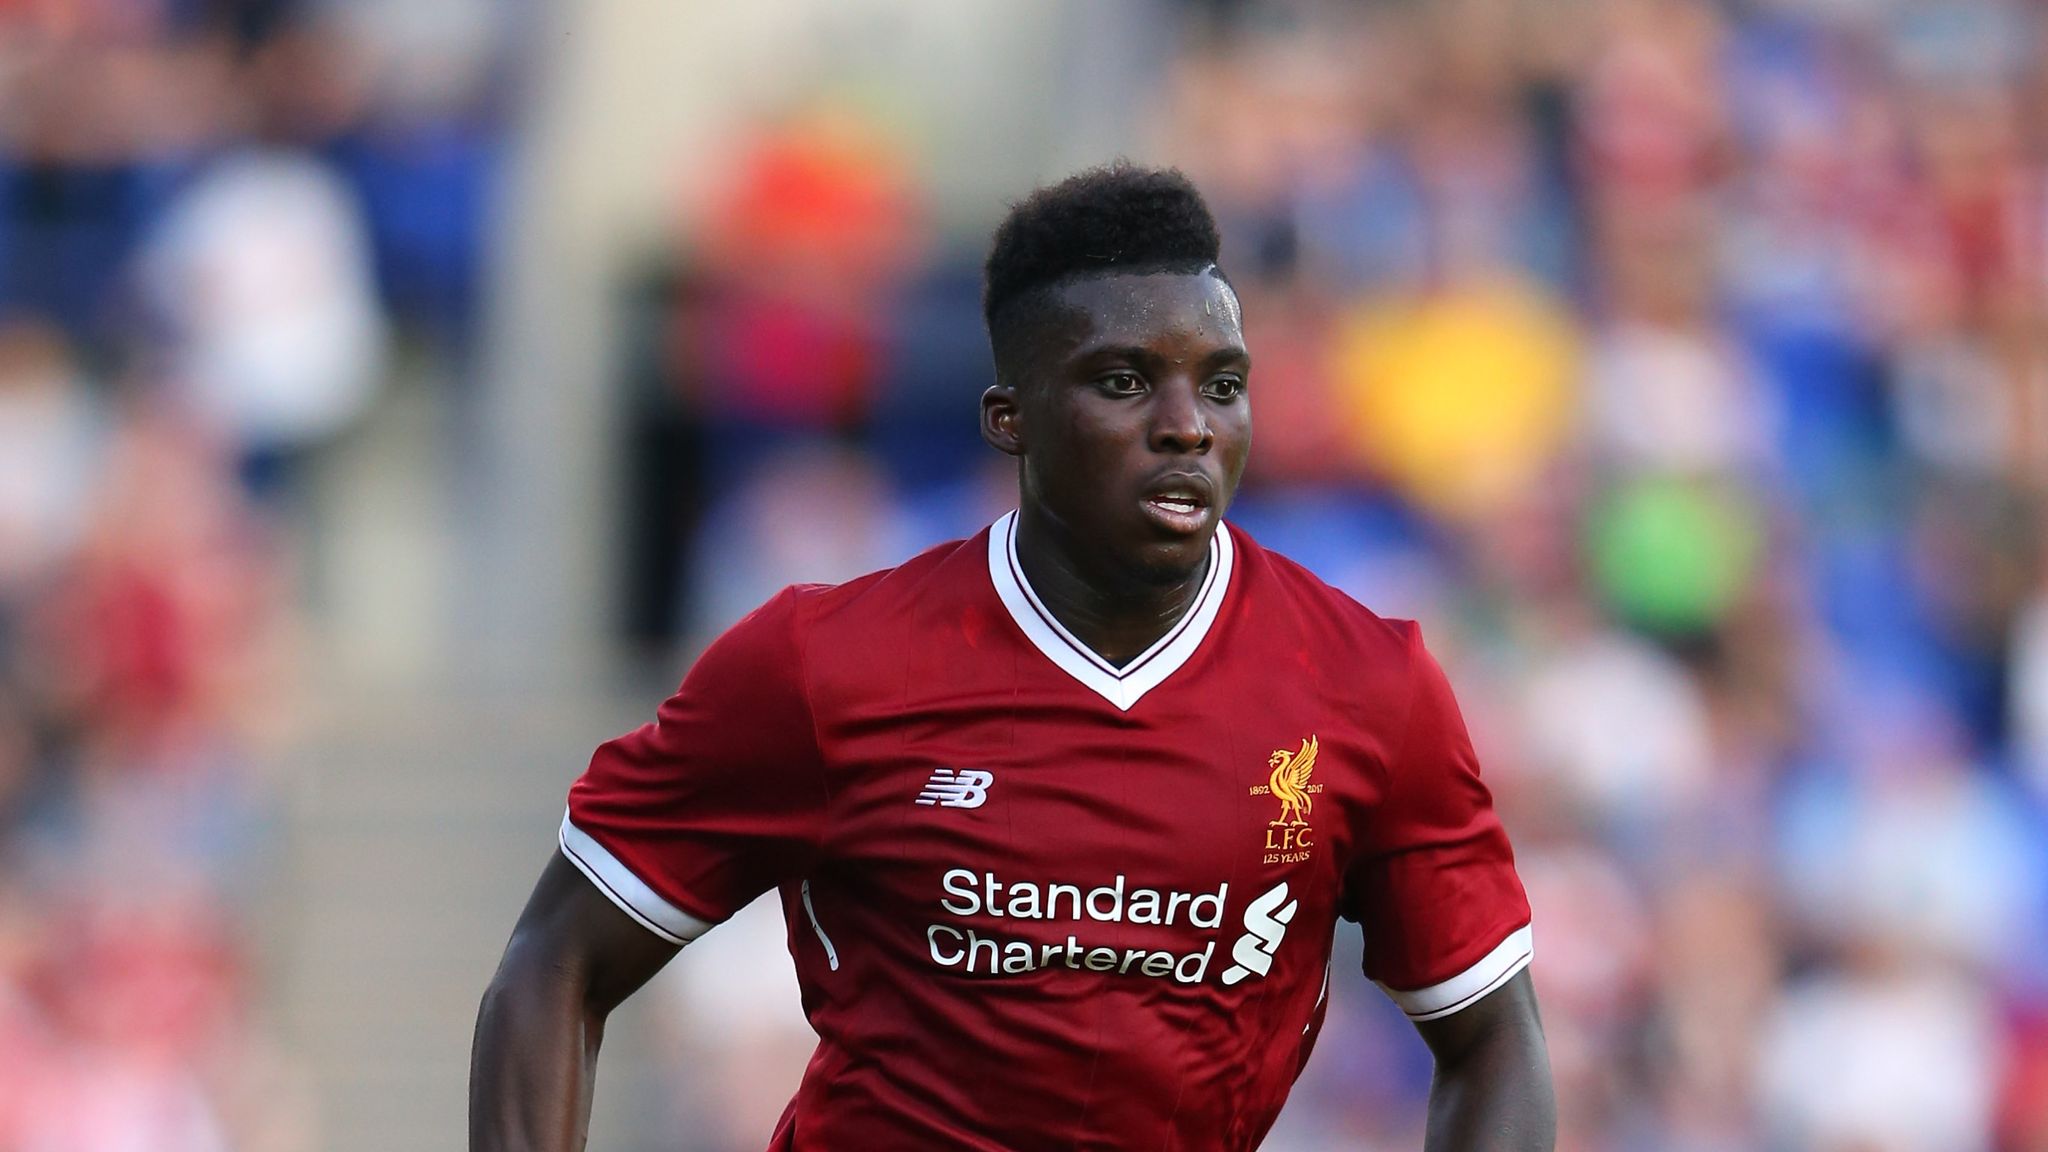 Cardiff City sign Nigerian and Liverpool winger, Sheyi Ojo